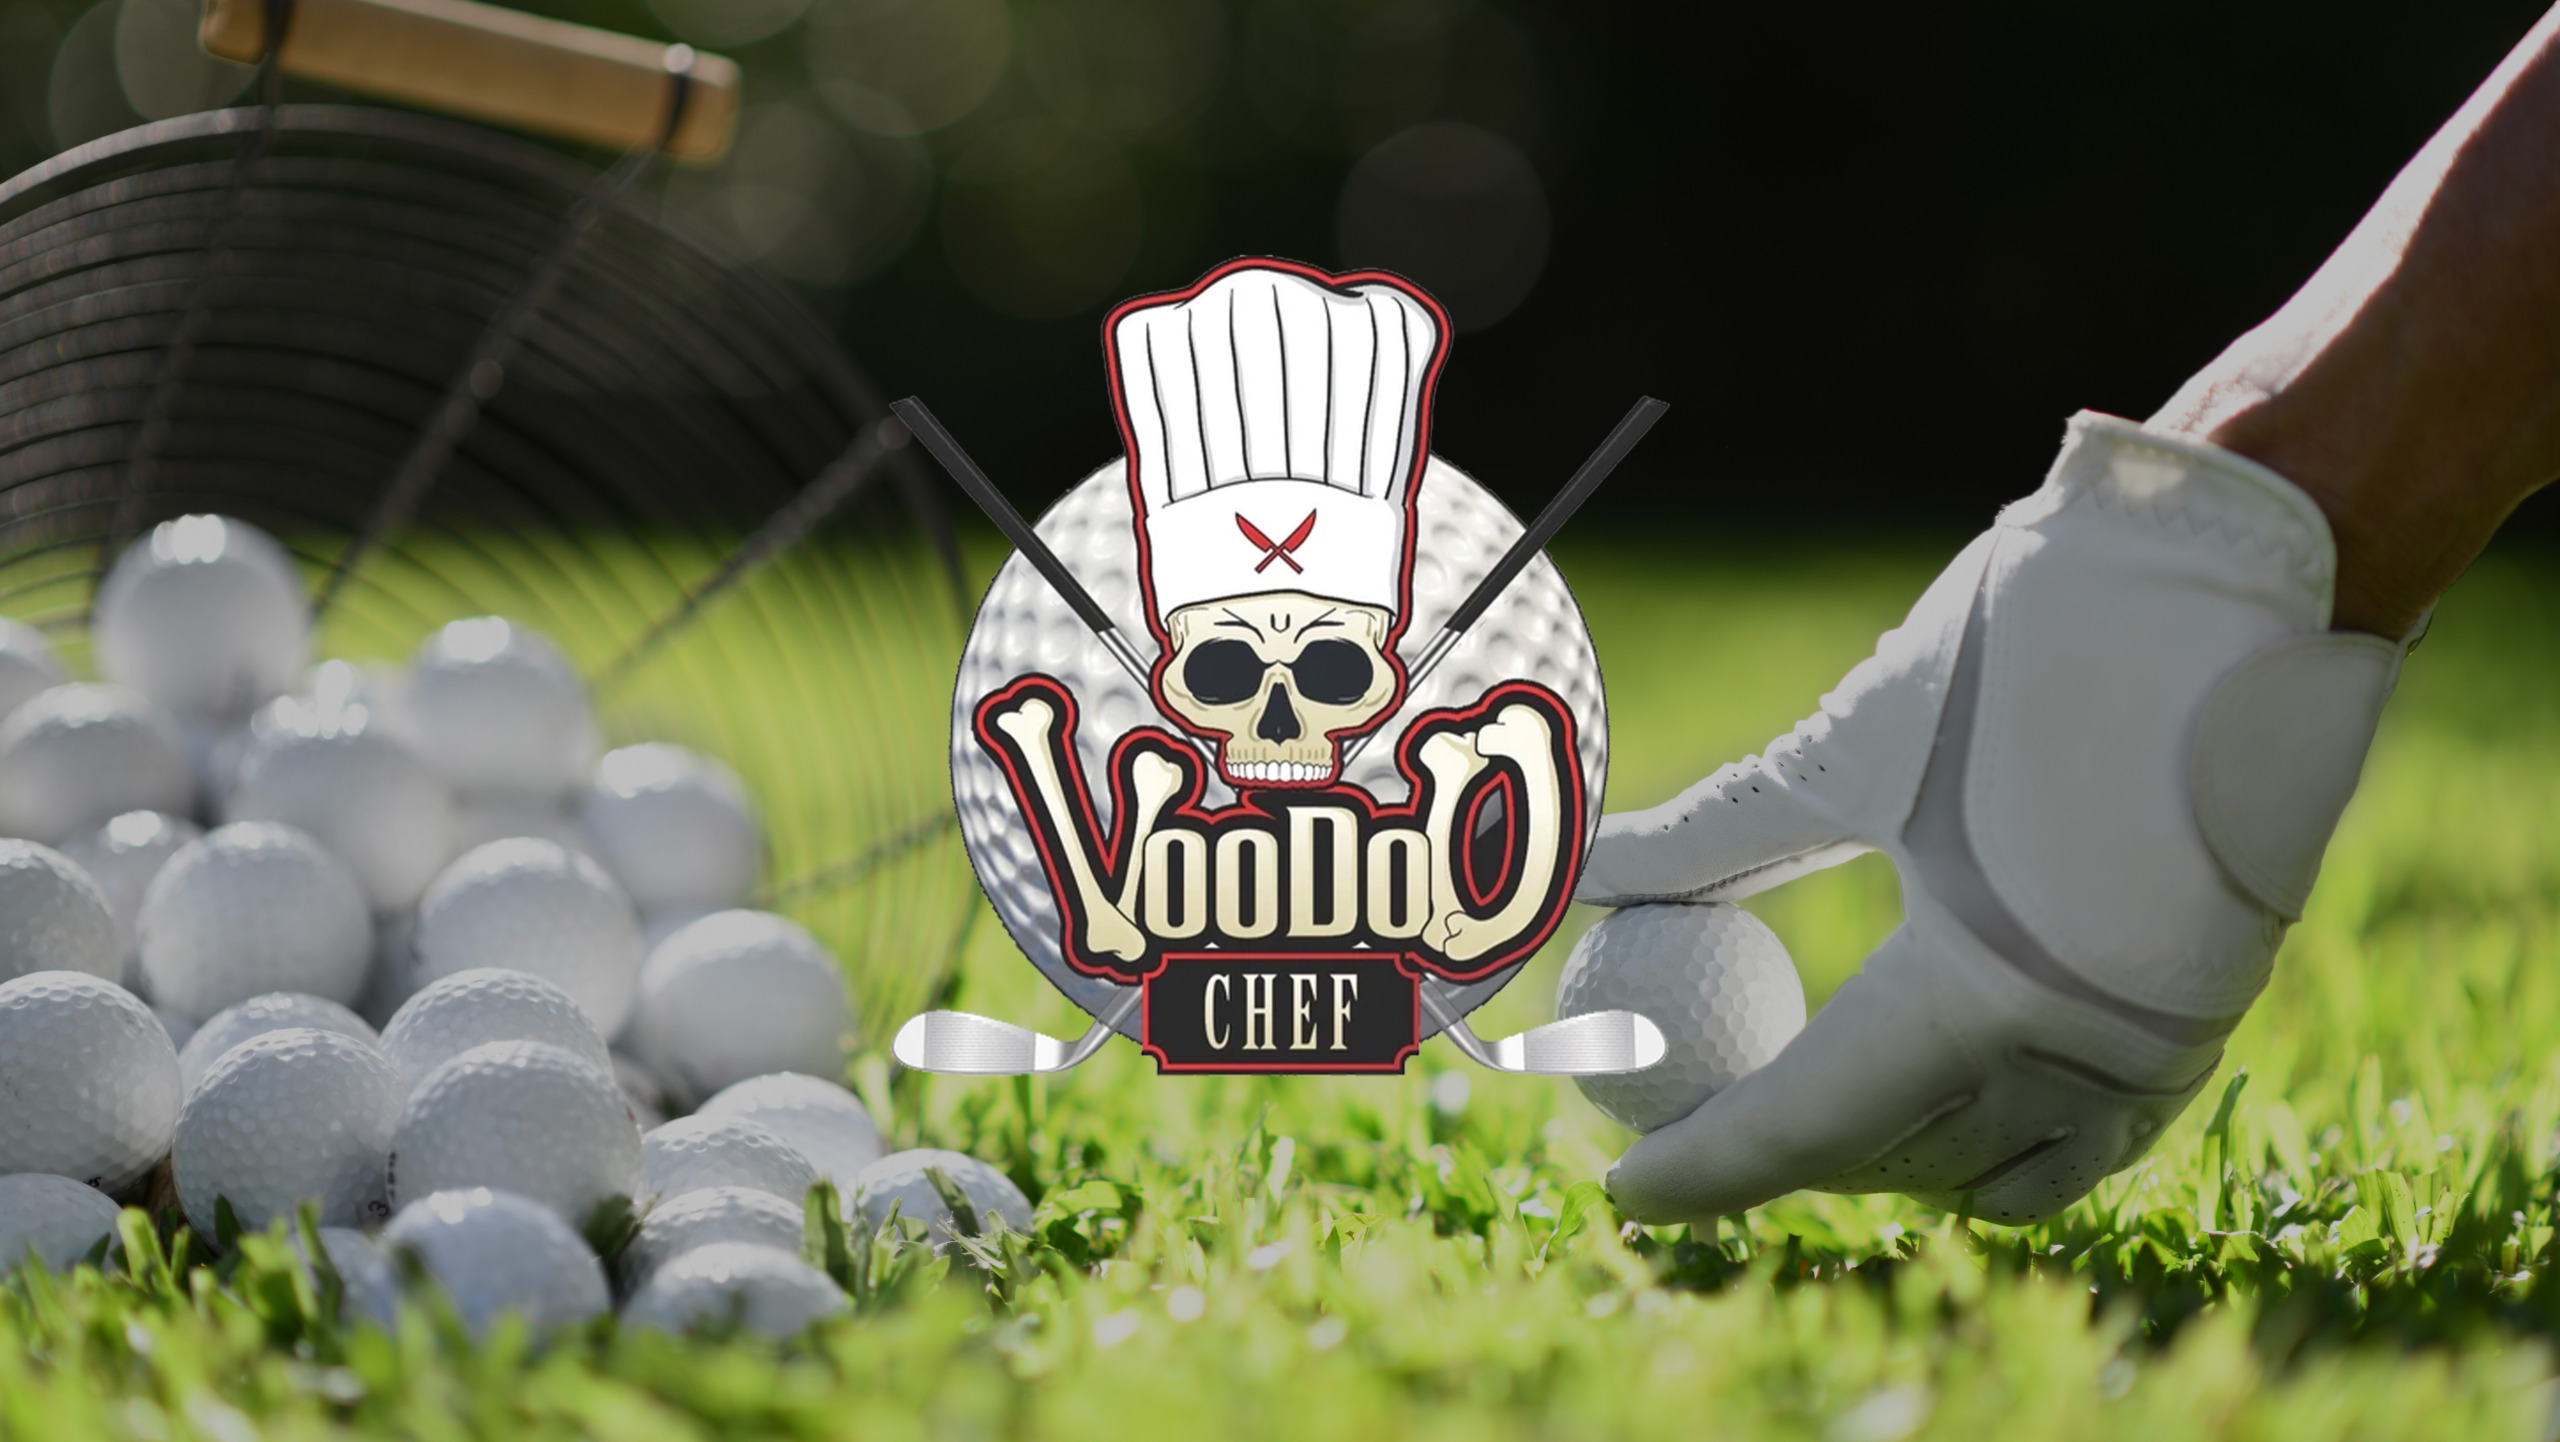 VooDoo Chef Charity Golf Tournament Presented by First Watch